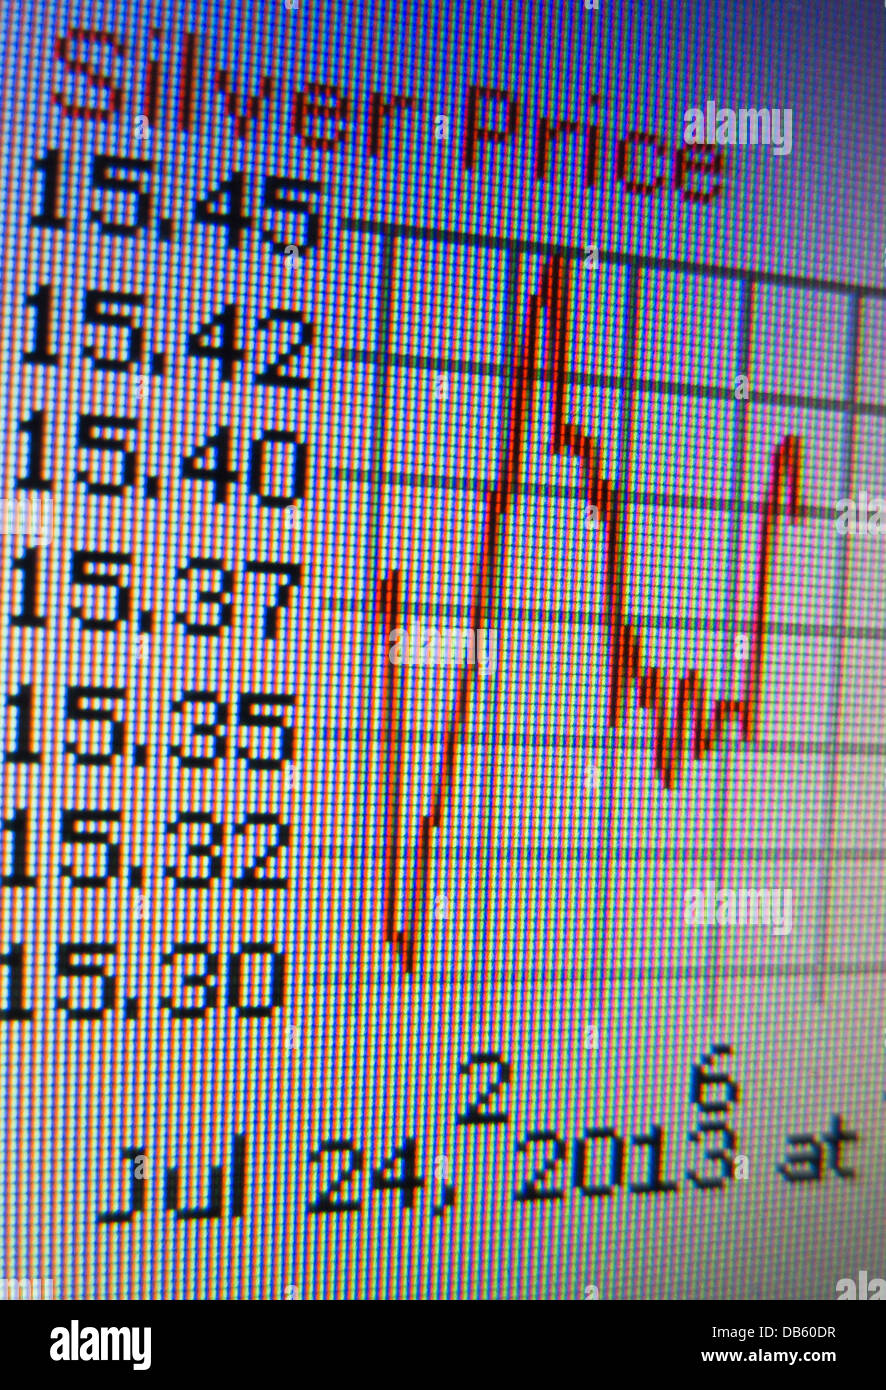 Graph showing fluctuations in the price of silver in Euros taken from a computer screen. Stock Photo